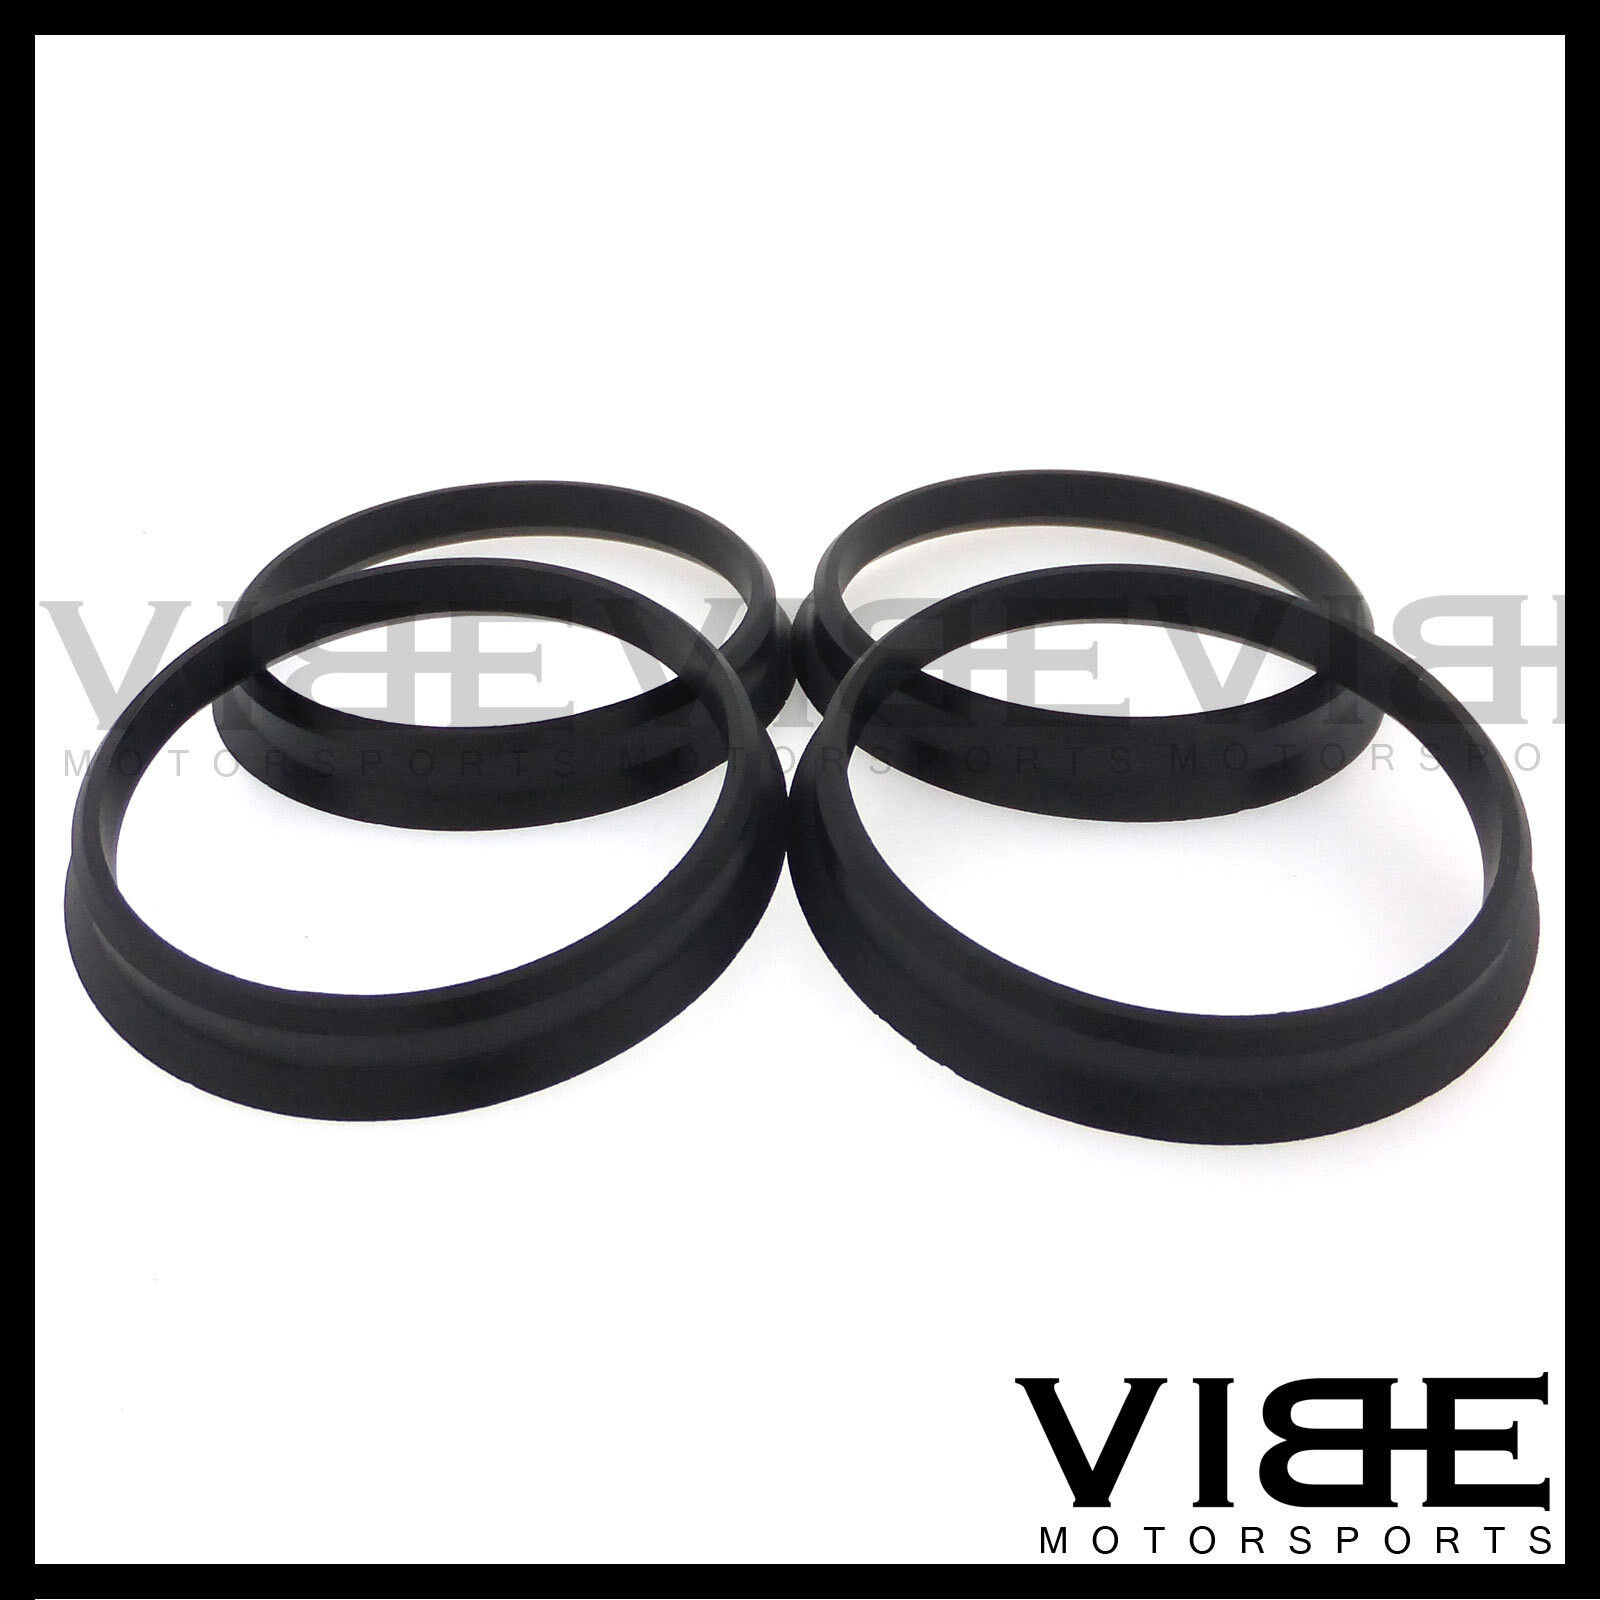 66 TO 57.1 HUB CENTRIC WHEEL CENTERING RINGS OD=66 ID=57.1 66mm TO 57mm